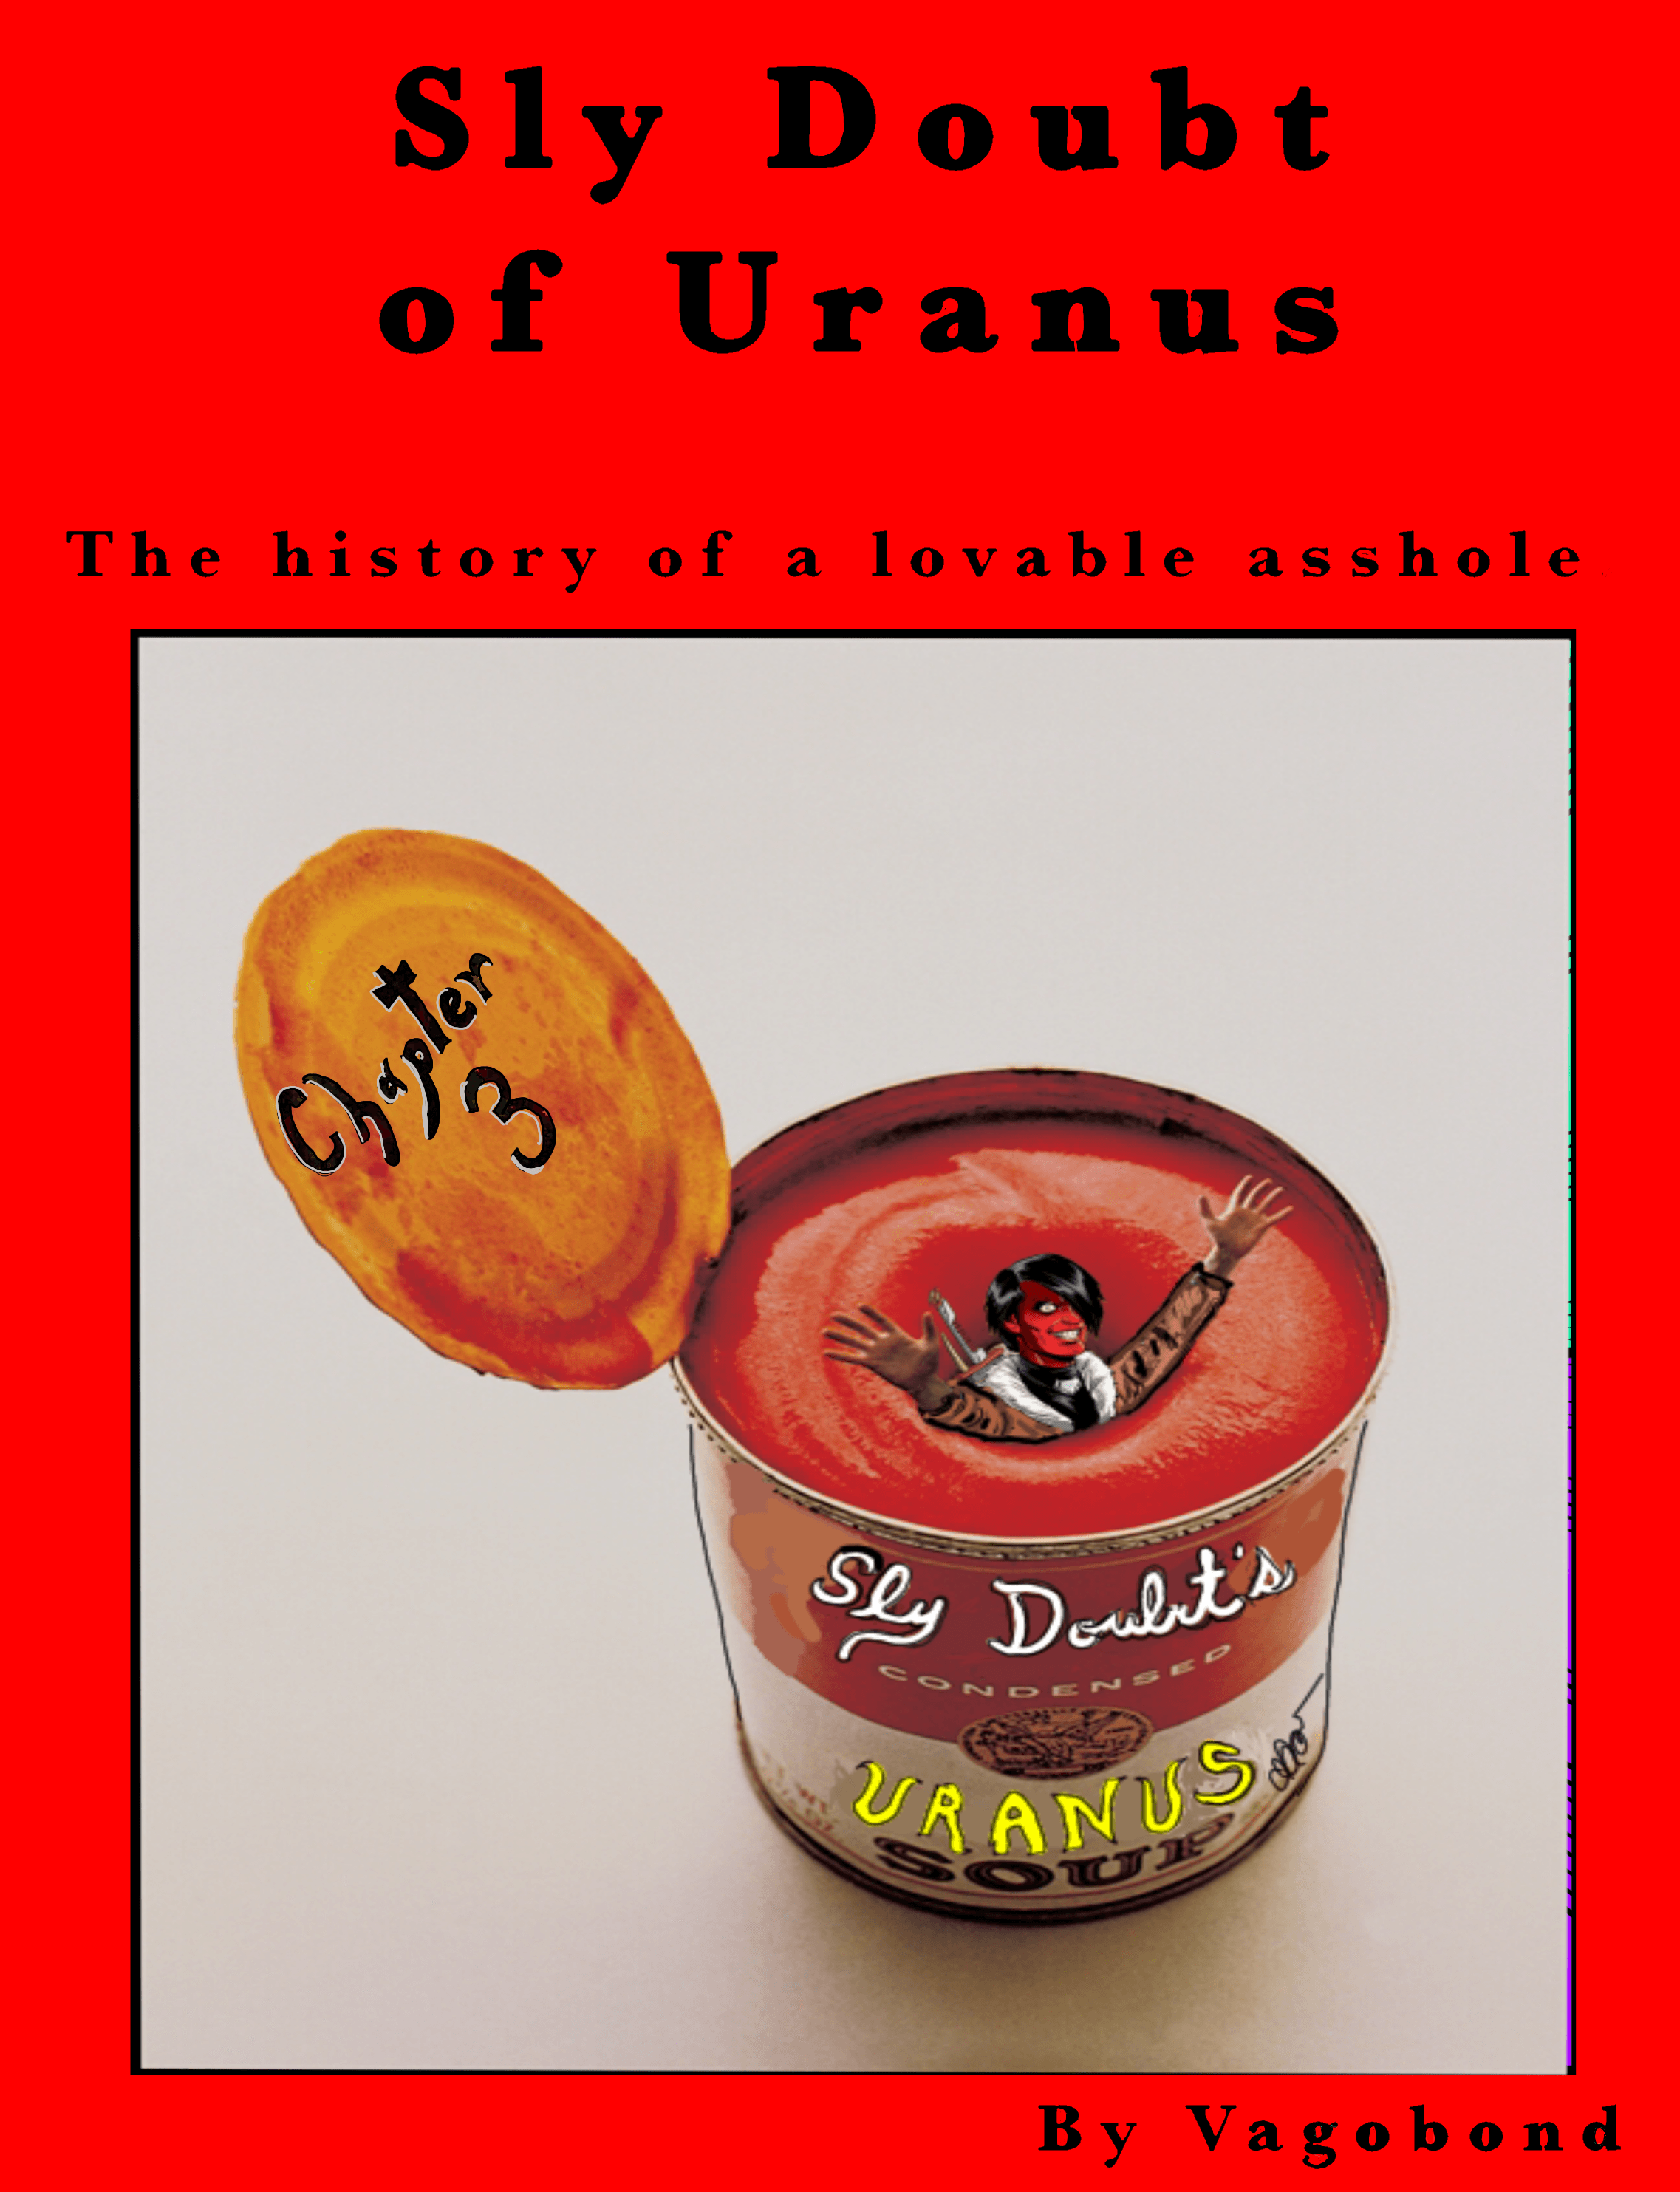 Sly Doubt of Uranus: The History of a Lovable Asshole - Chapter 3:  1st Edition - 1st Printing